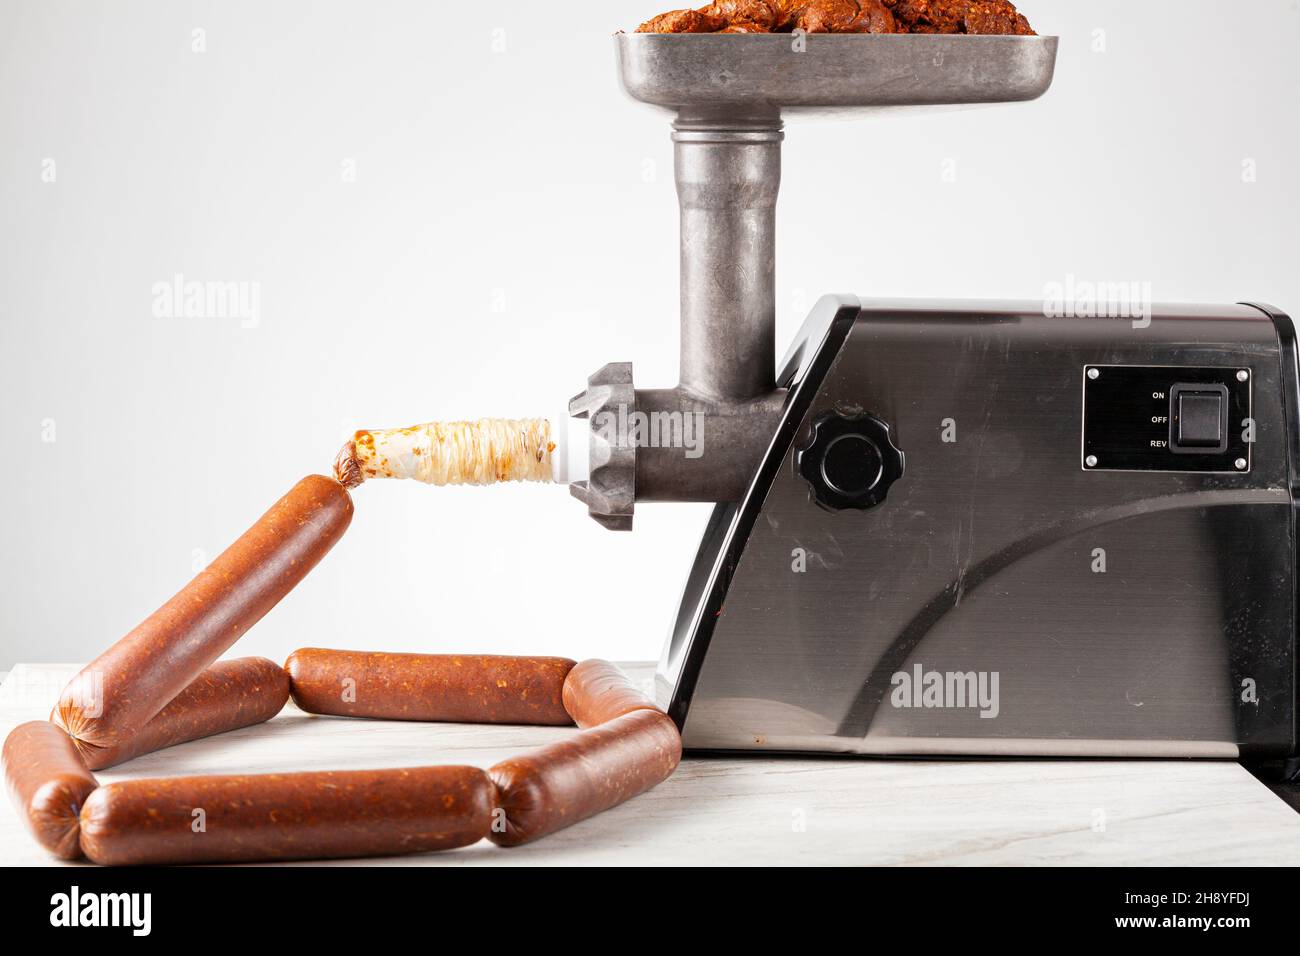 Close up isolated image of homemade sucuk or Sausage that is being stuffed into casing using electrical stuffer device. Stock Photo